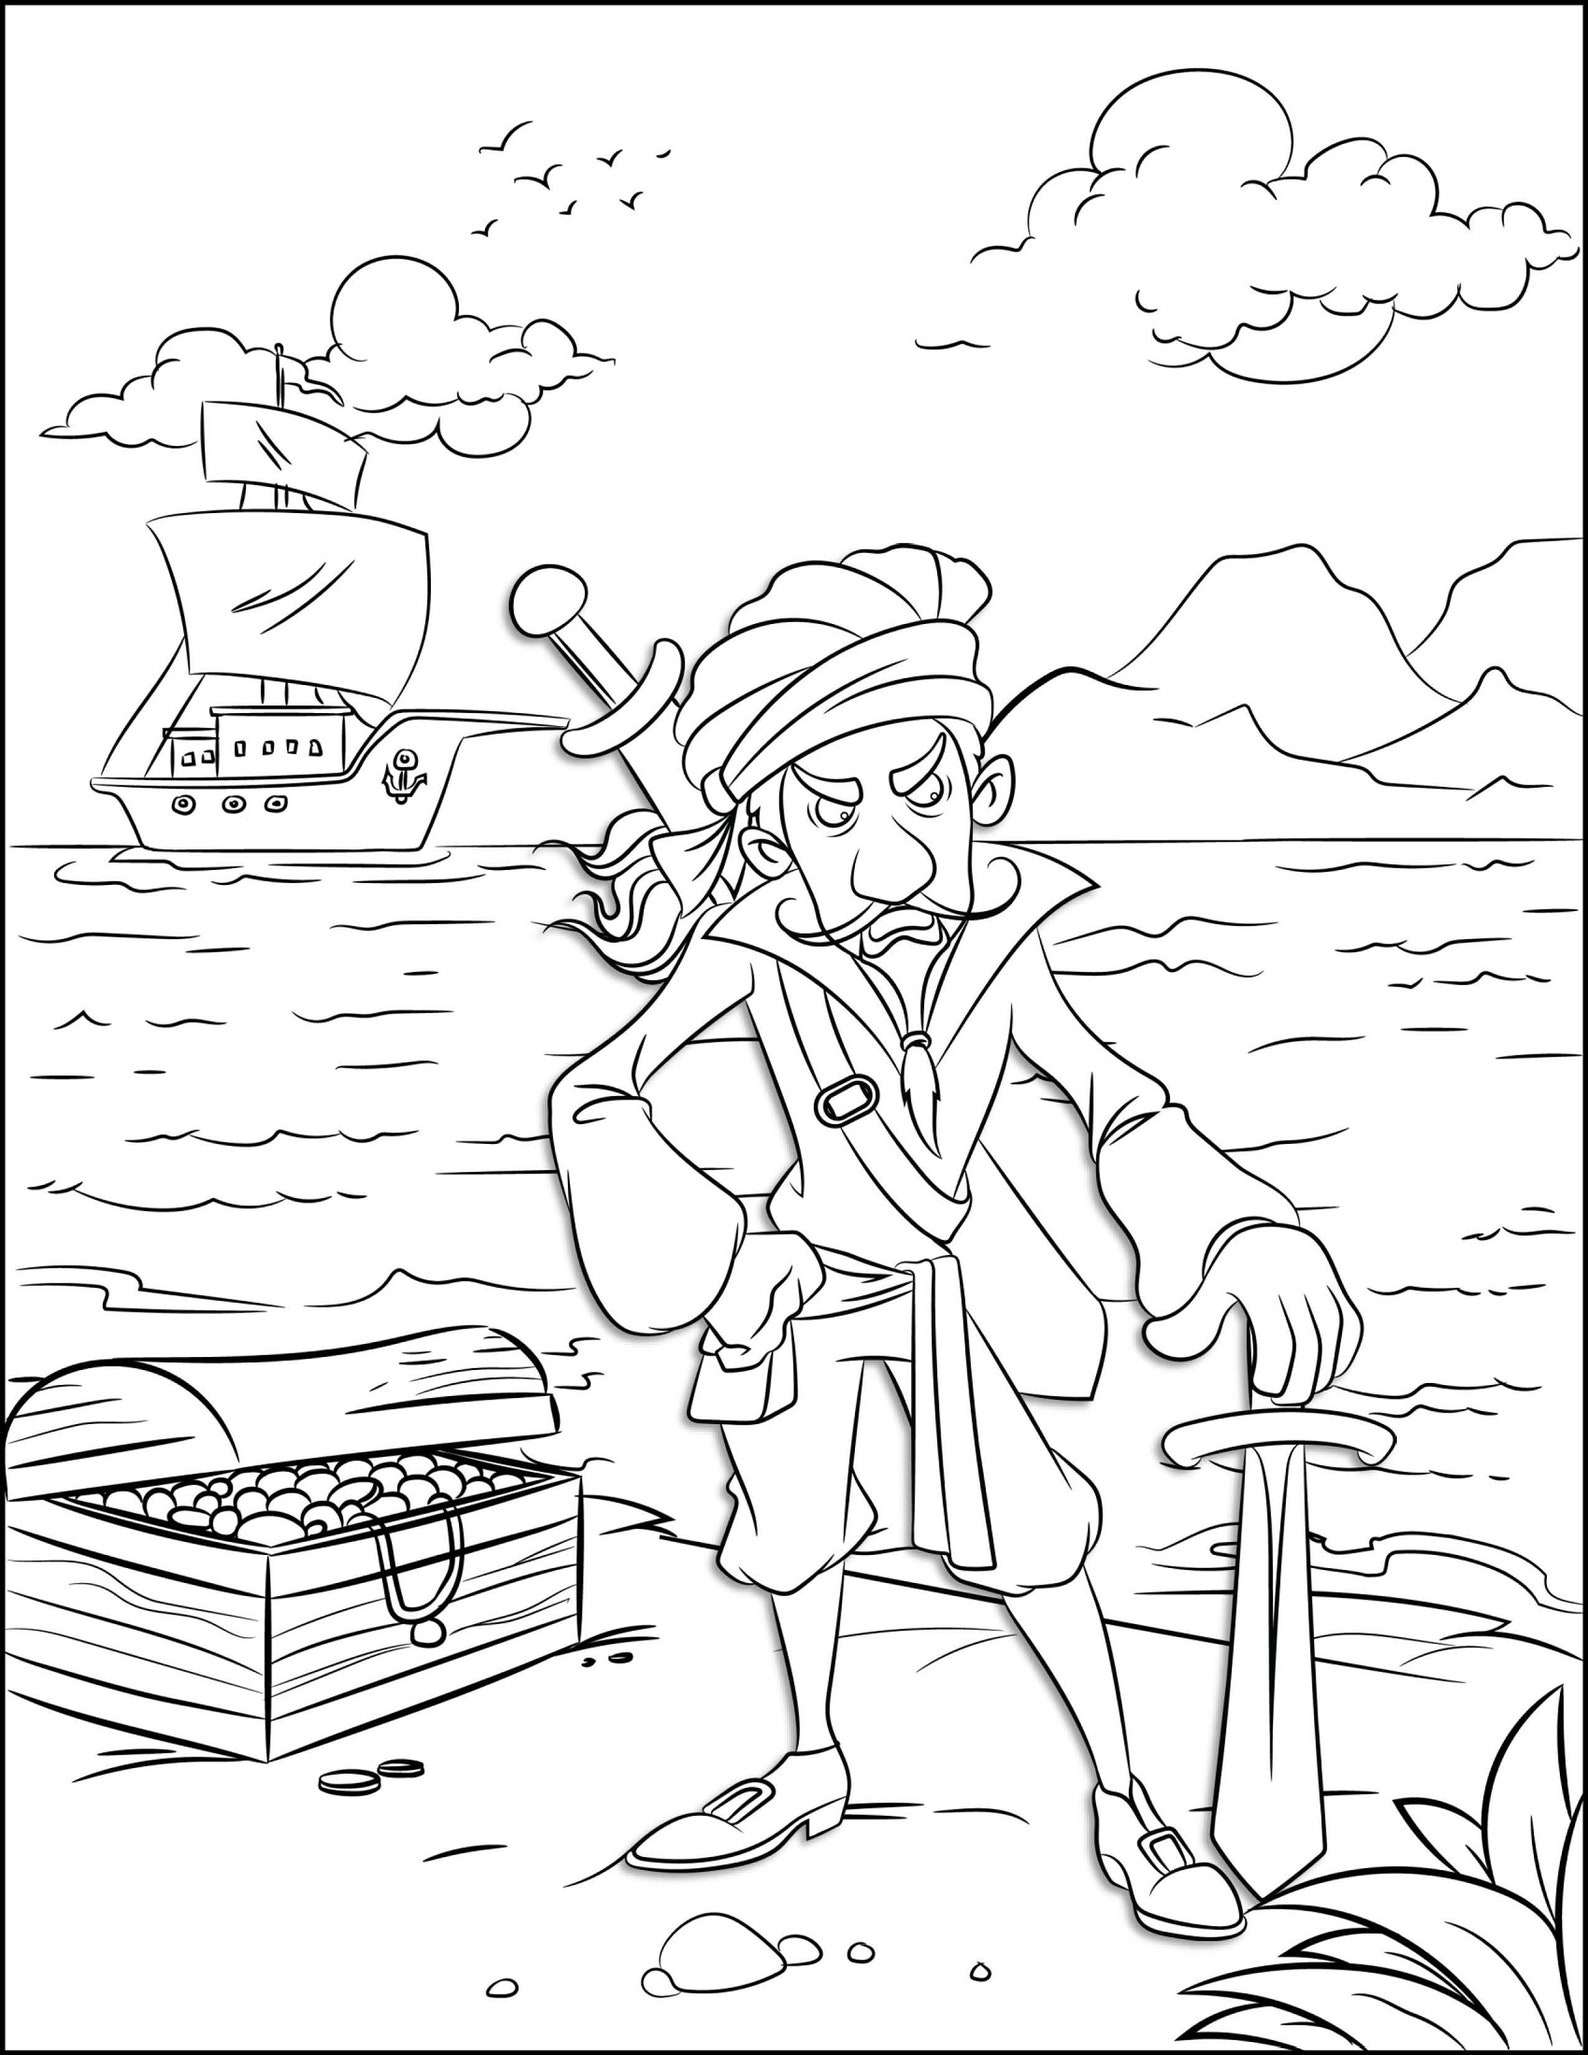 Coloring Pages for Kids Pirates & Fantastic Background - Etsy